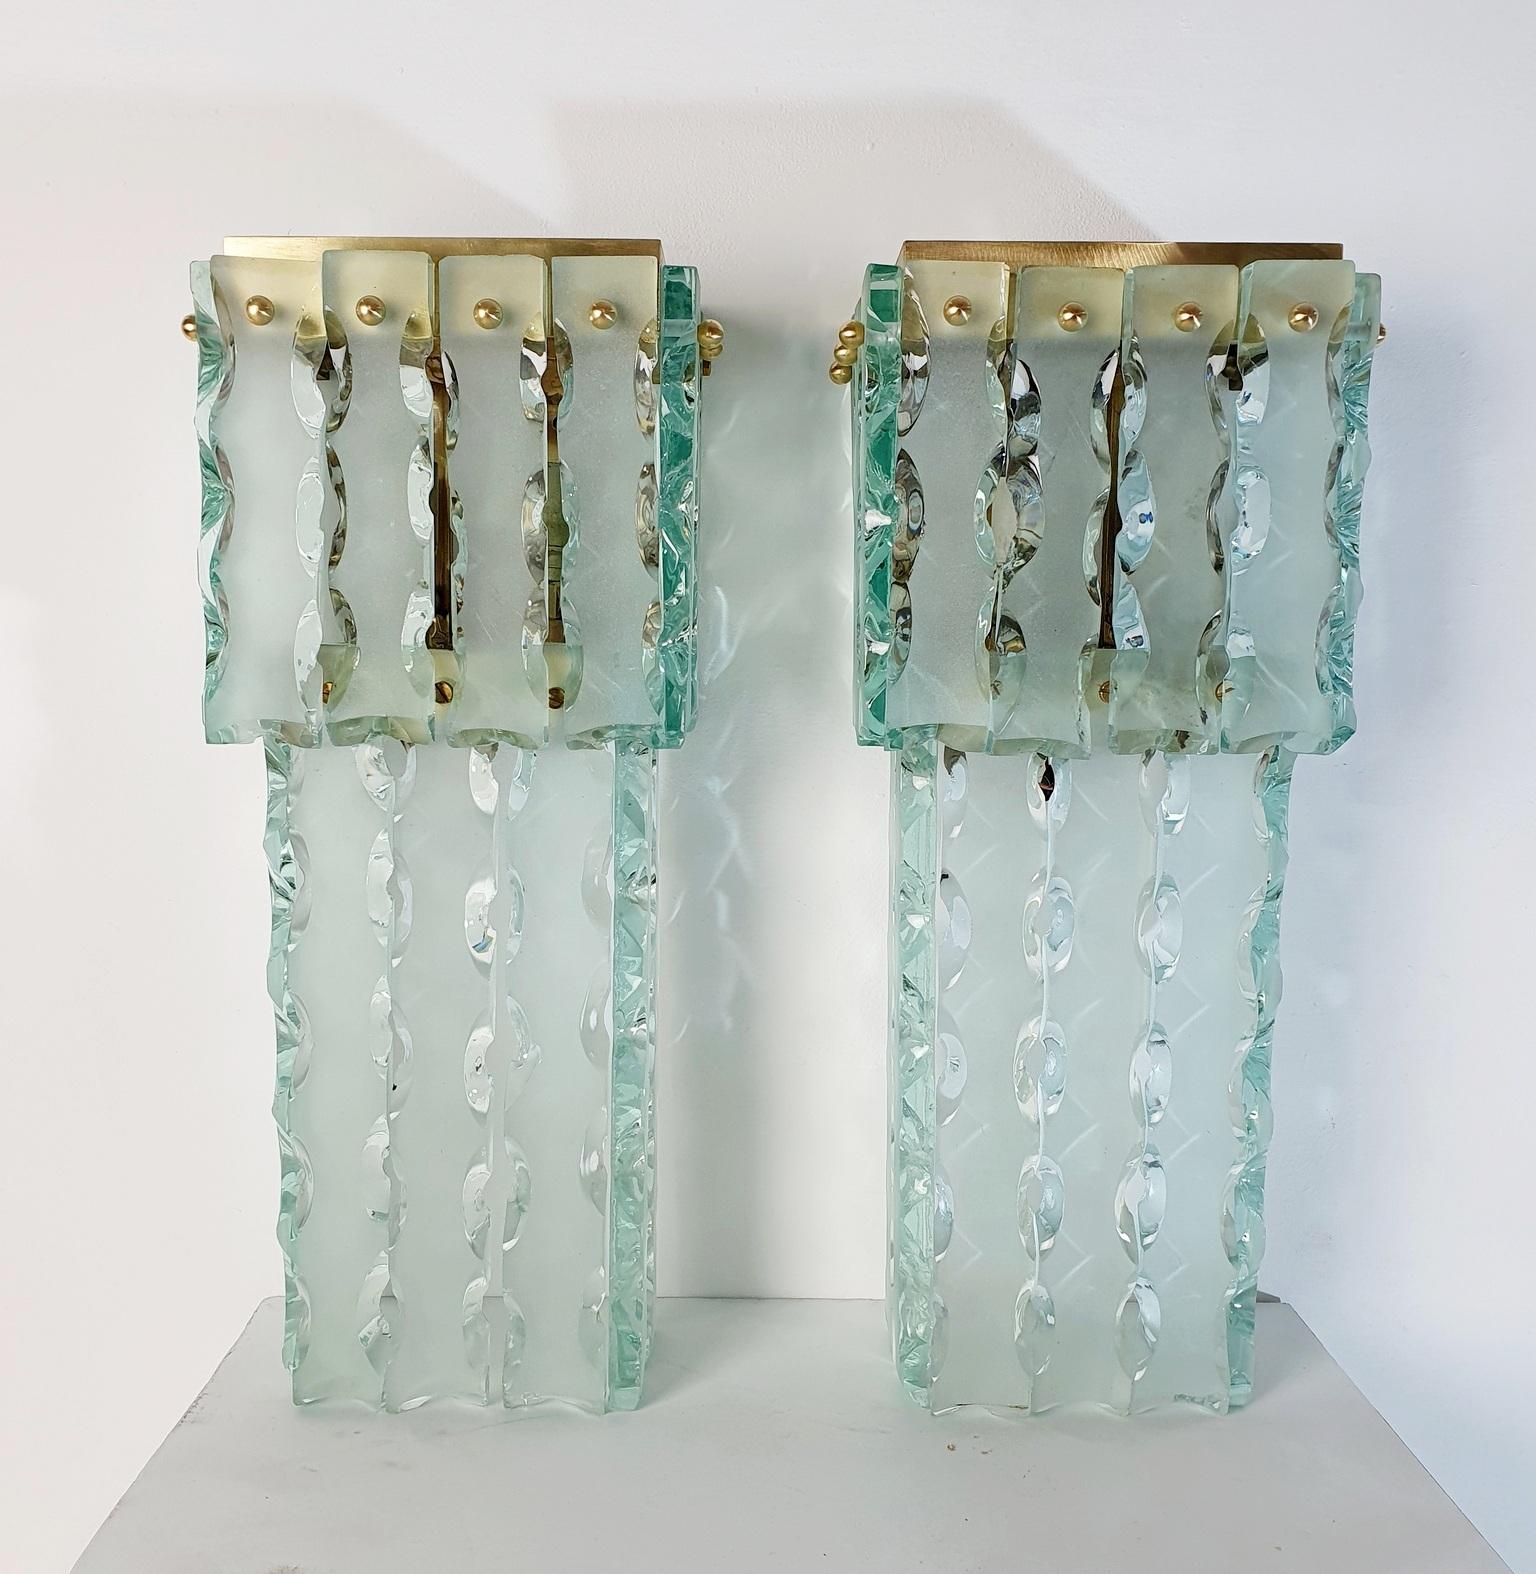 A pair of large and heavy set wall sconces handmade in Murano glass as well as structures custom made for this particular glass. by Mazzega. Each sconce contains large pieces of clear glass rods which are held in place by a brass ball. These wall